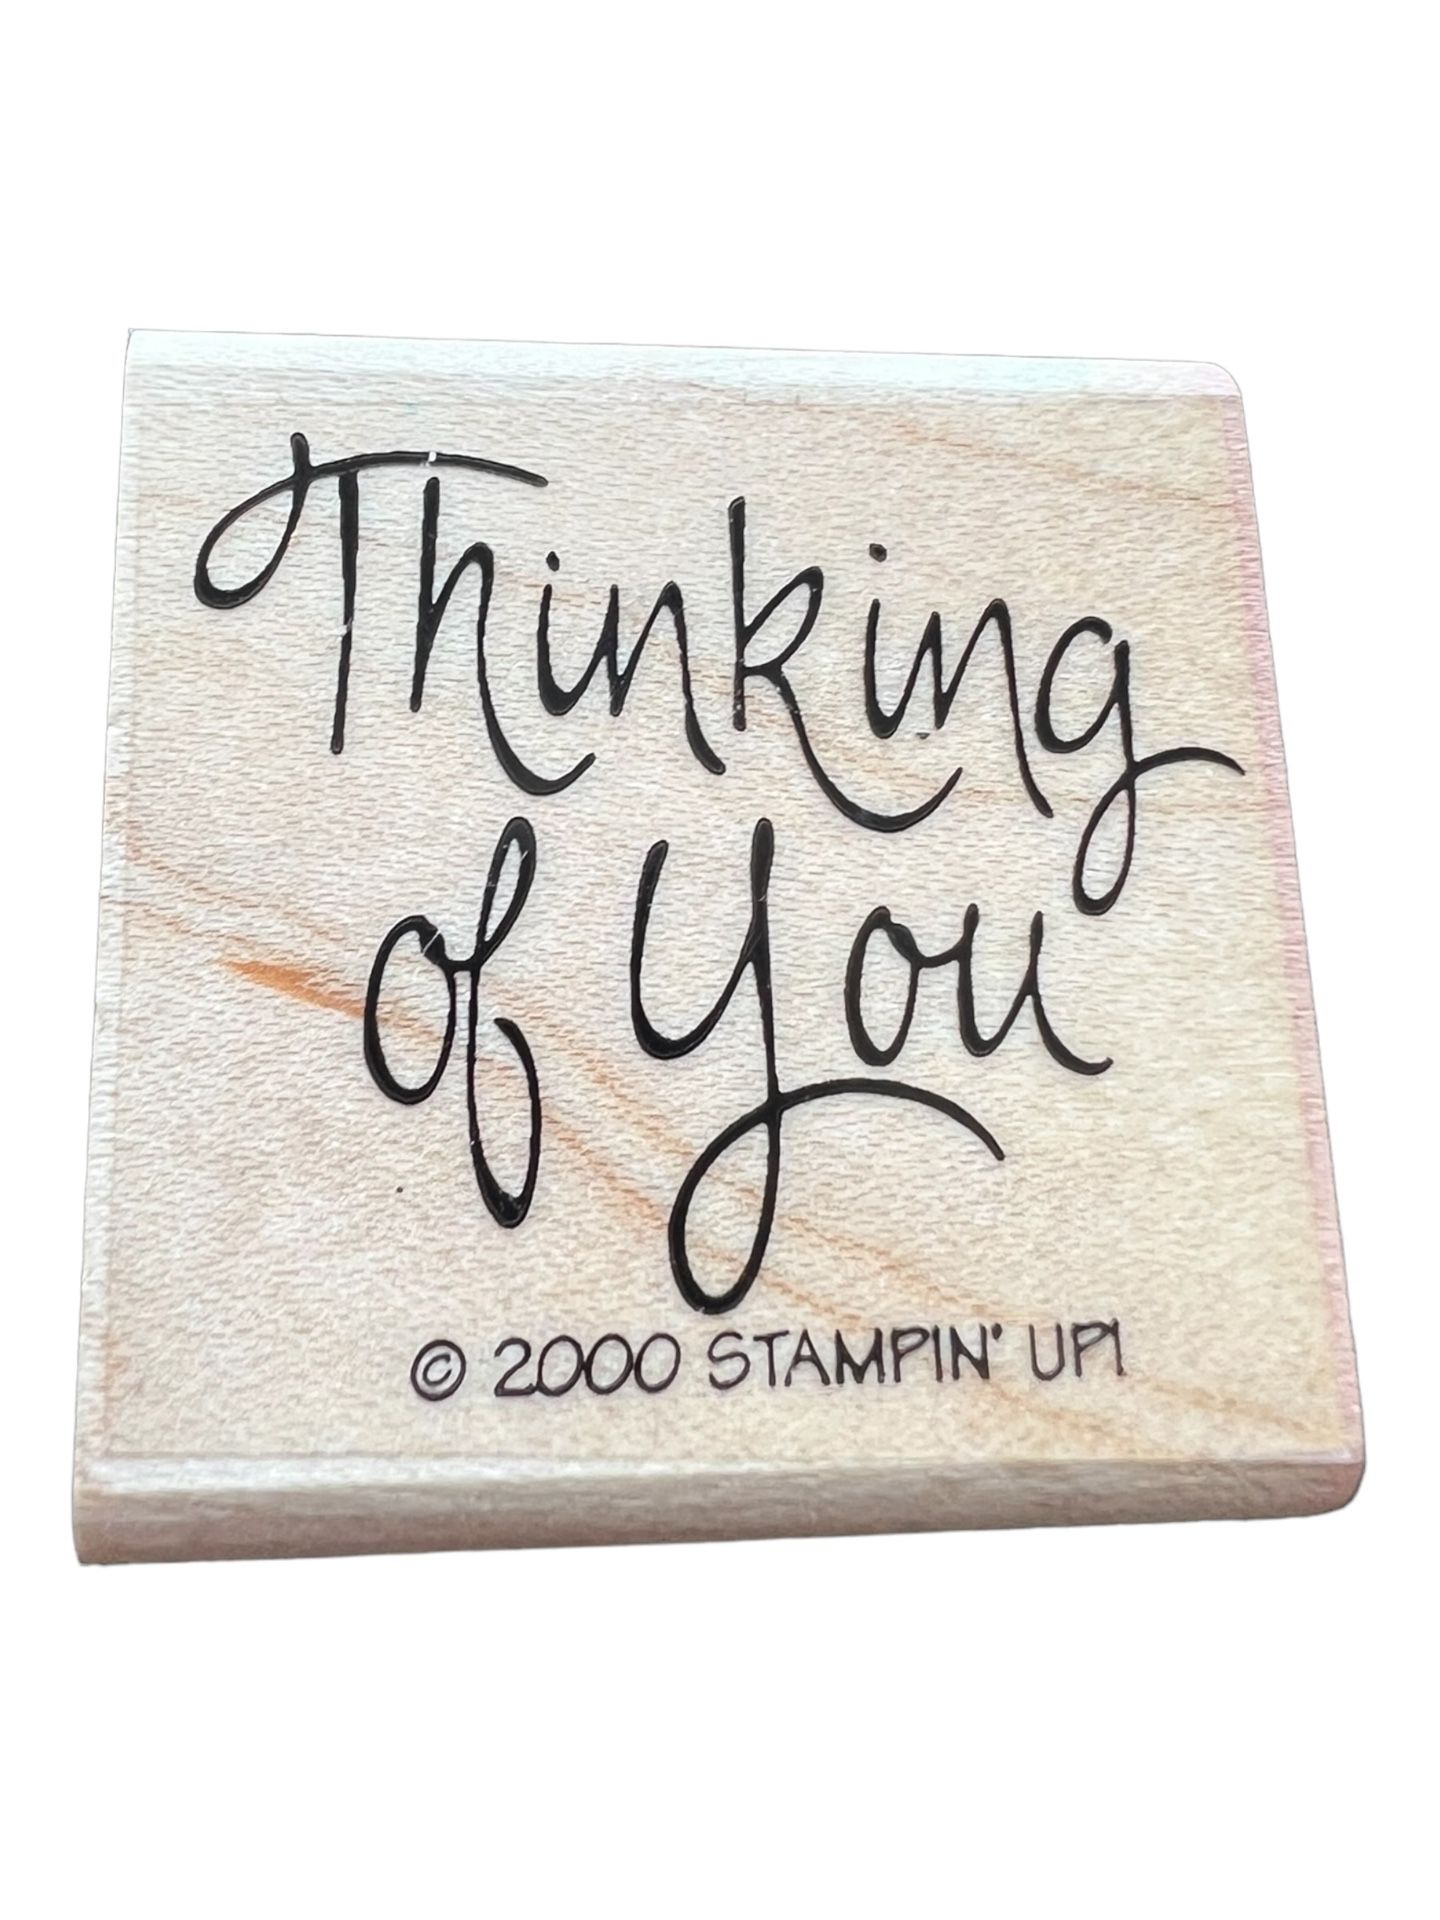 Stampin' Up! Thinking Of You Rubber Stamp 2001 Script Wood Mount #Ai30  This Stampin' Up! Thinking Of You Rubber Stamp 2001 Script Wood Mount #Ai30 is